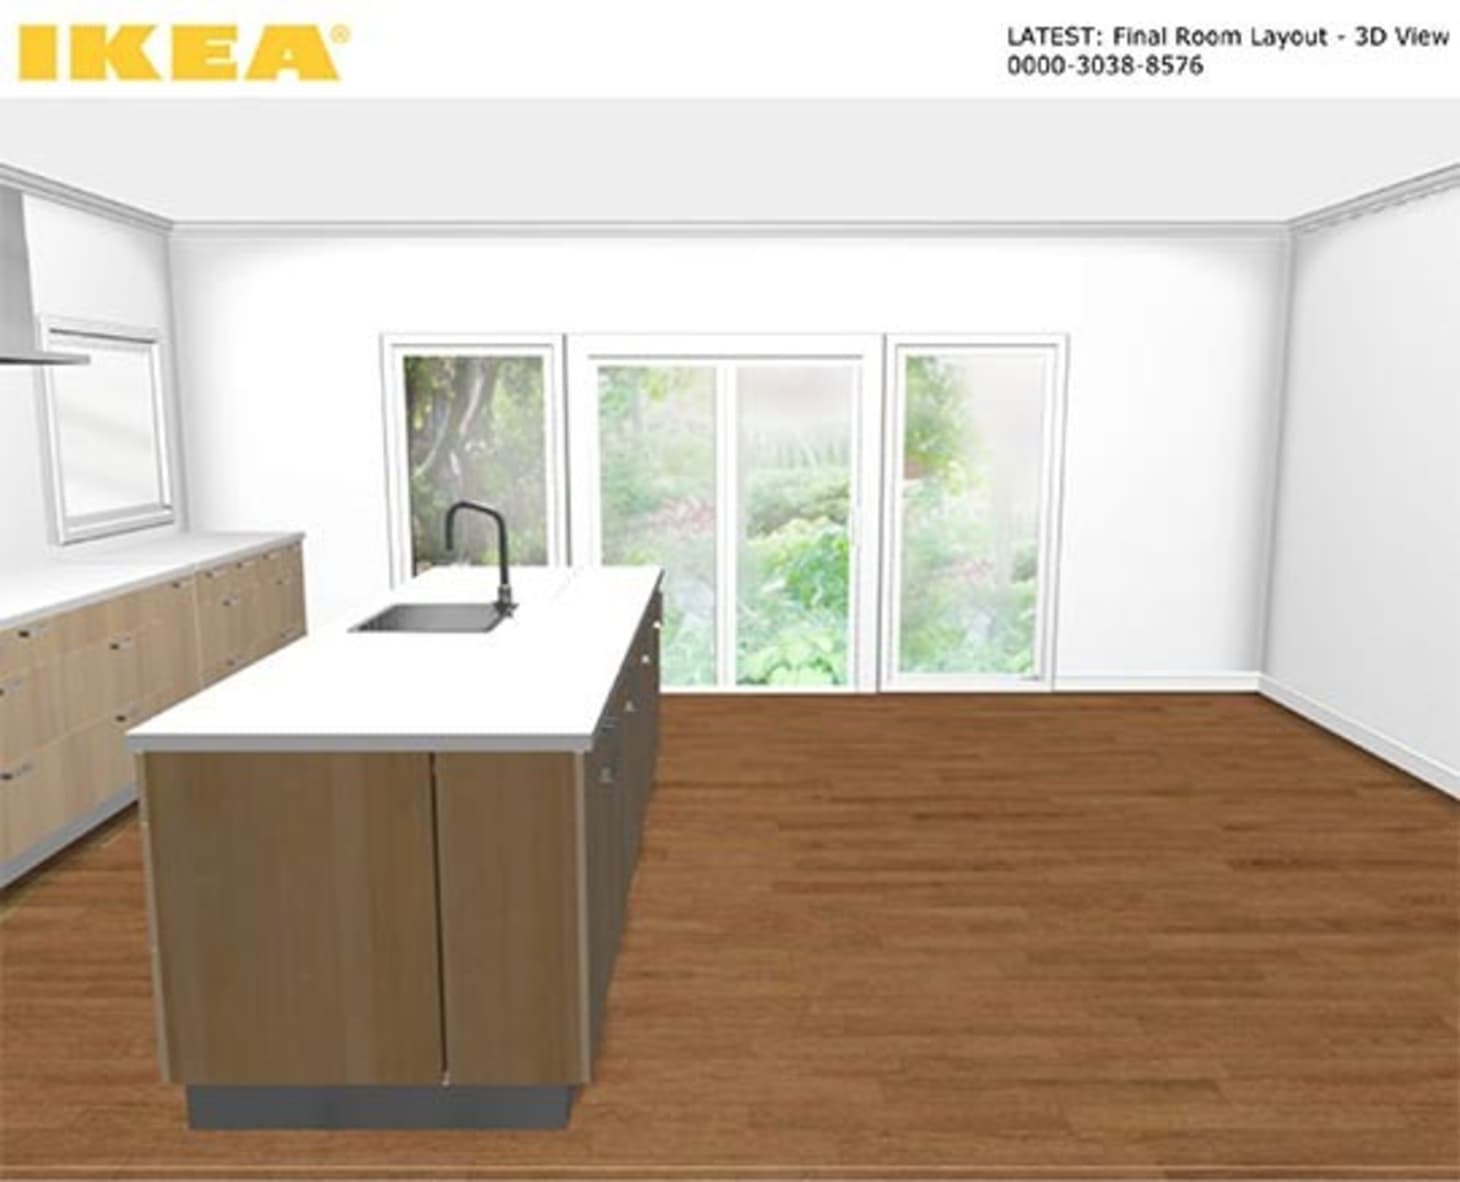 Ikea Kitchen Review Remodel Cost Cabinets Quality Kitchn